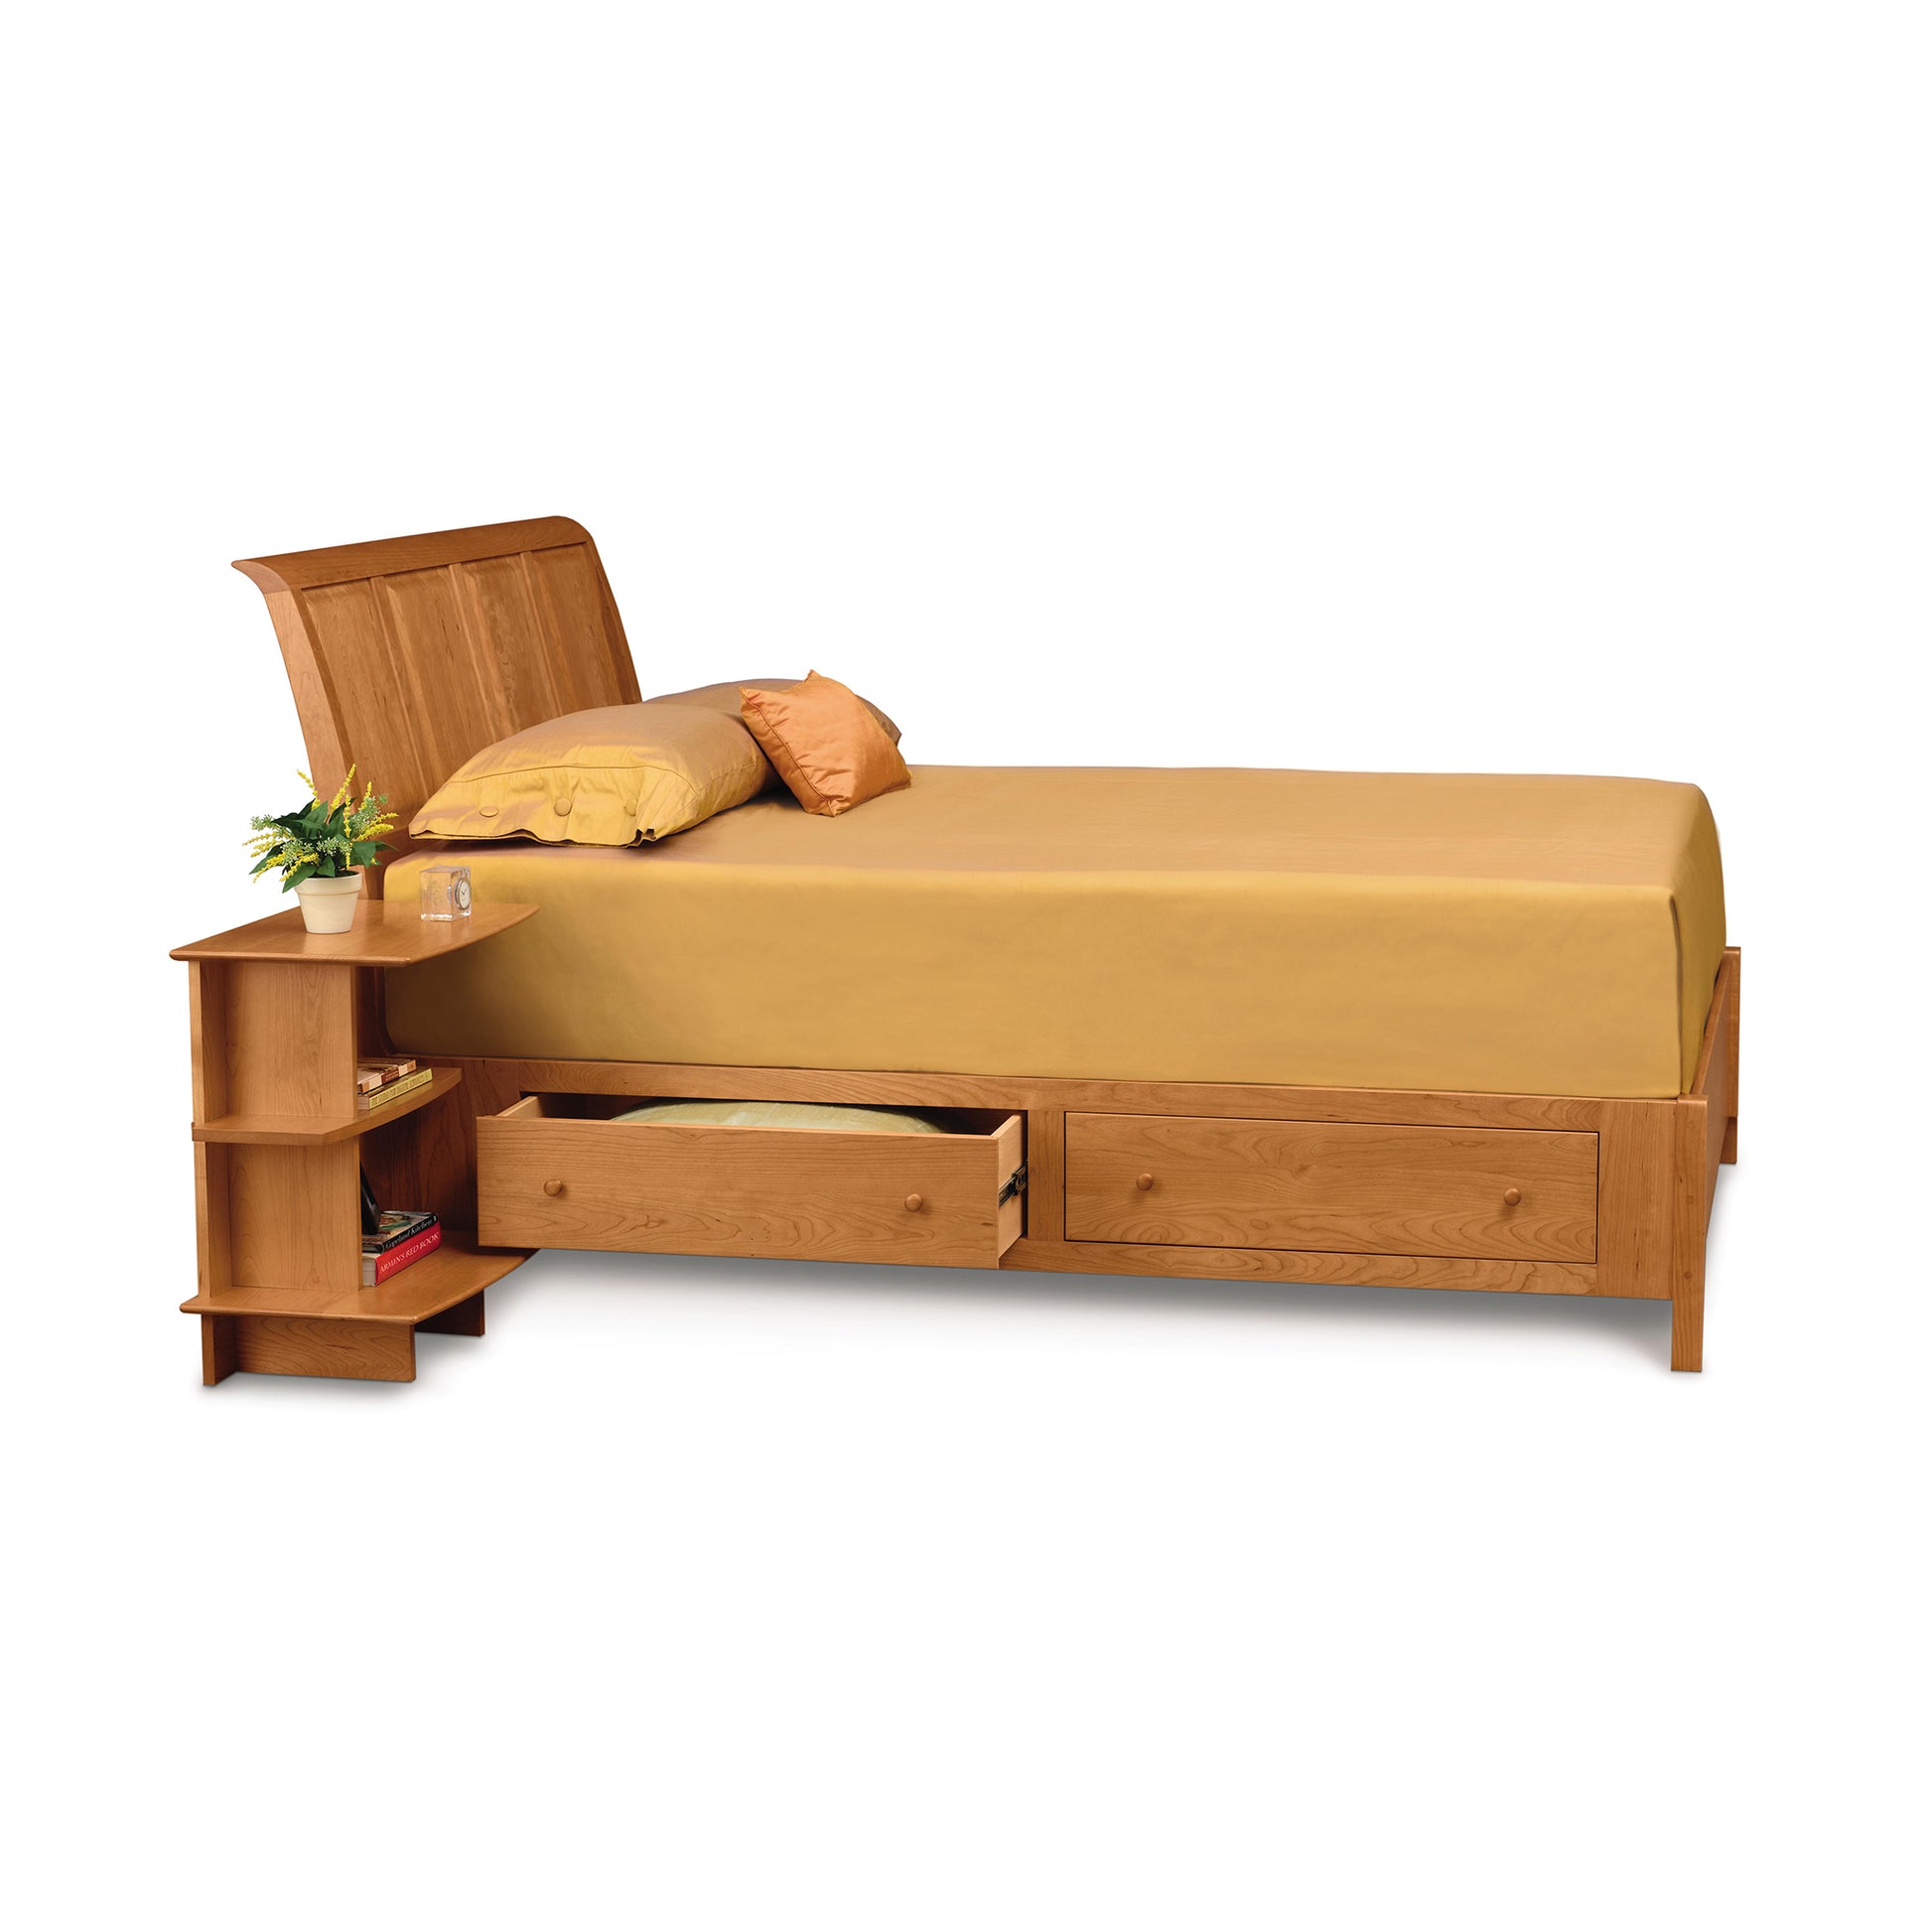 A single Sarah Sleigh Storage Bed by Copeland Furniture with storage drawers and shelves, complete with gold-colored bedding and a small plant on the bedside shelf.